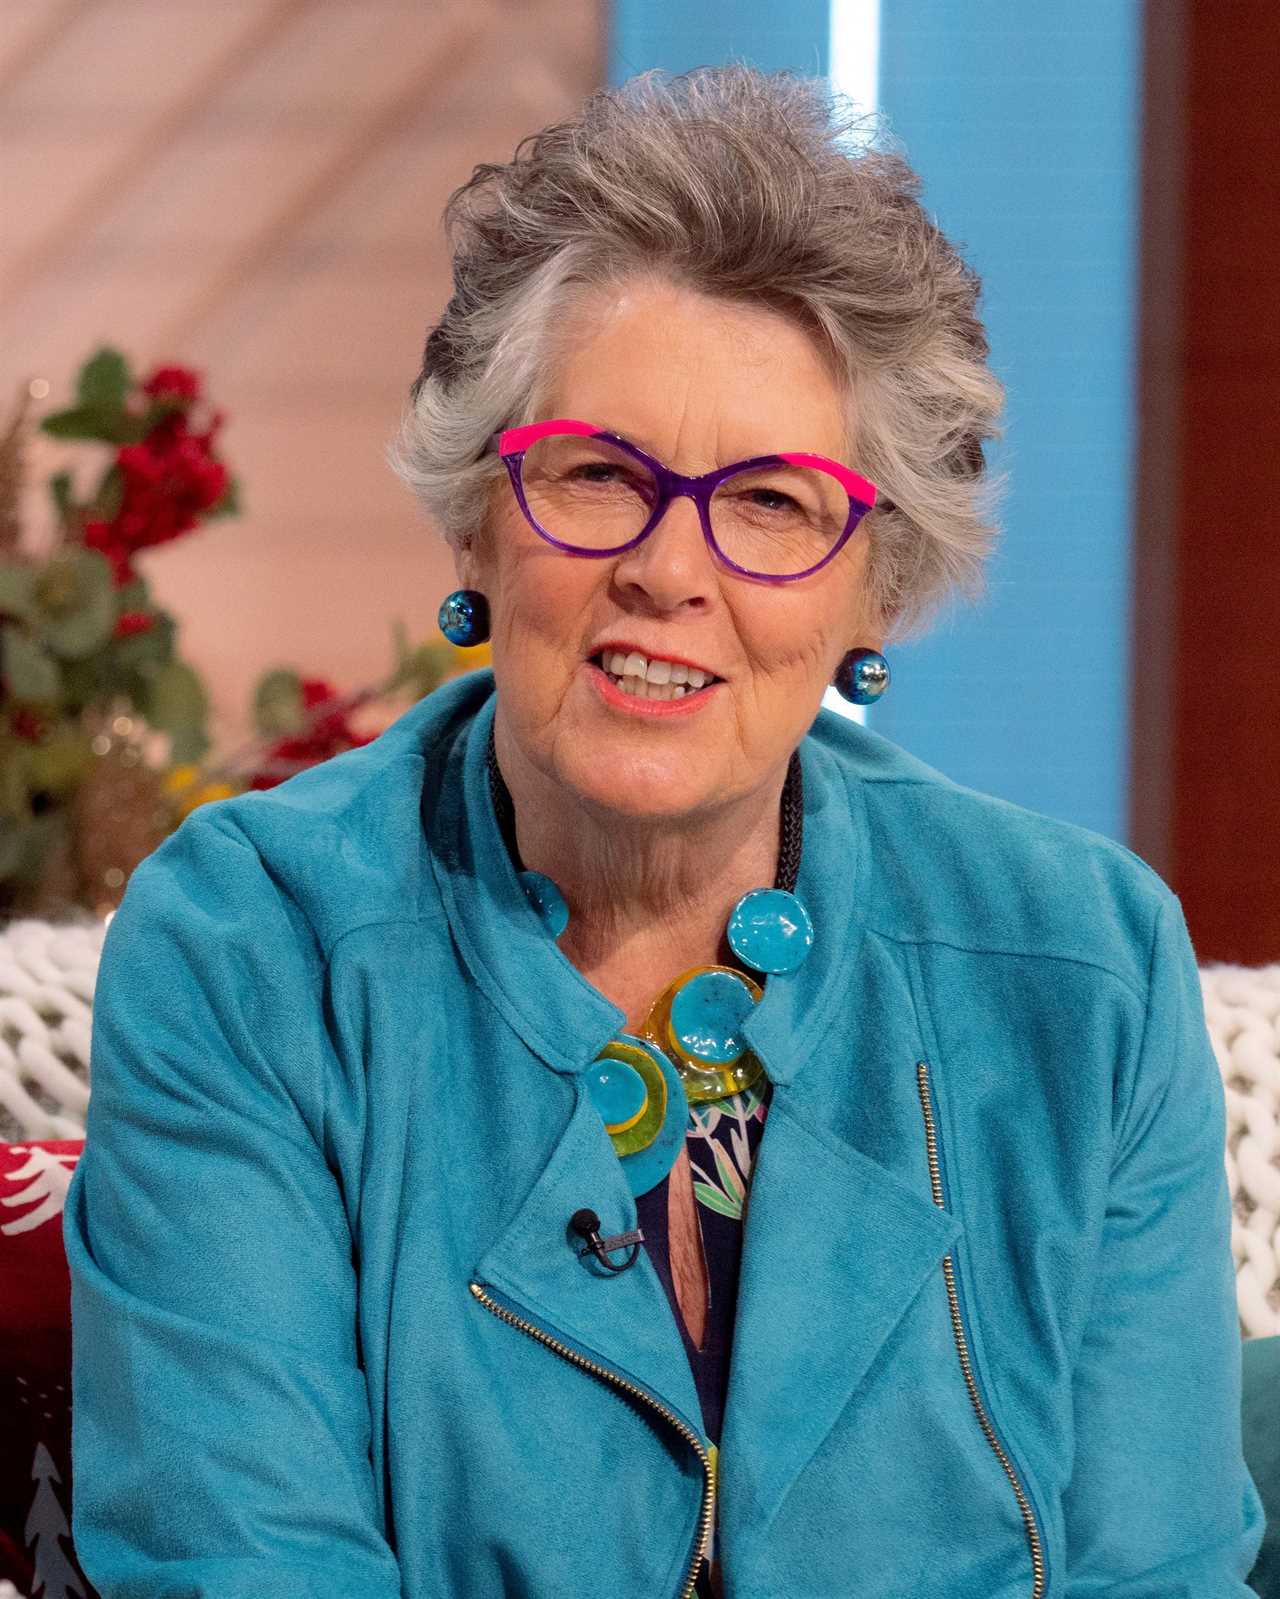 Prue Leith Reveals Secret to Weight Loss on Great British Bake Off